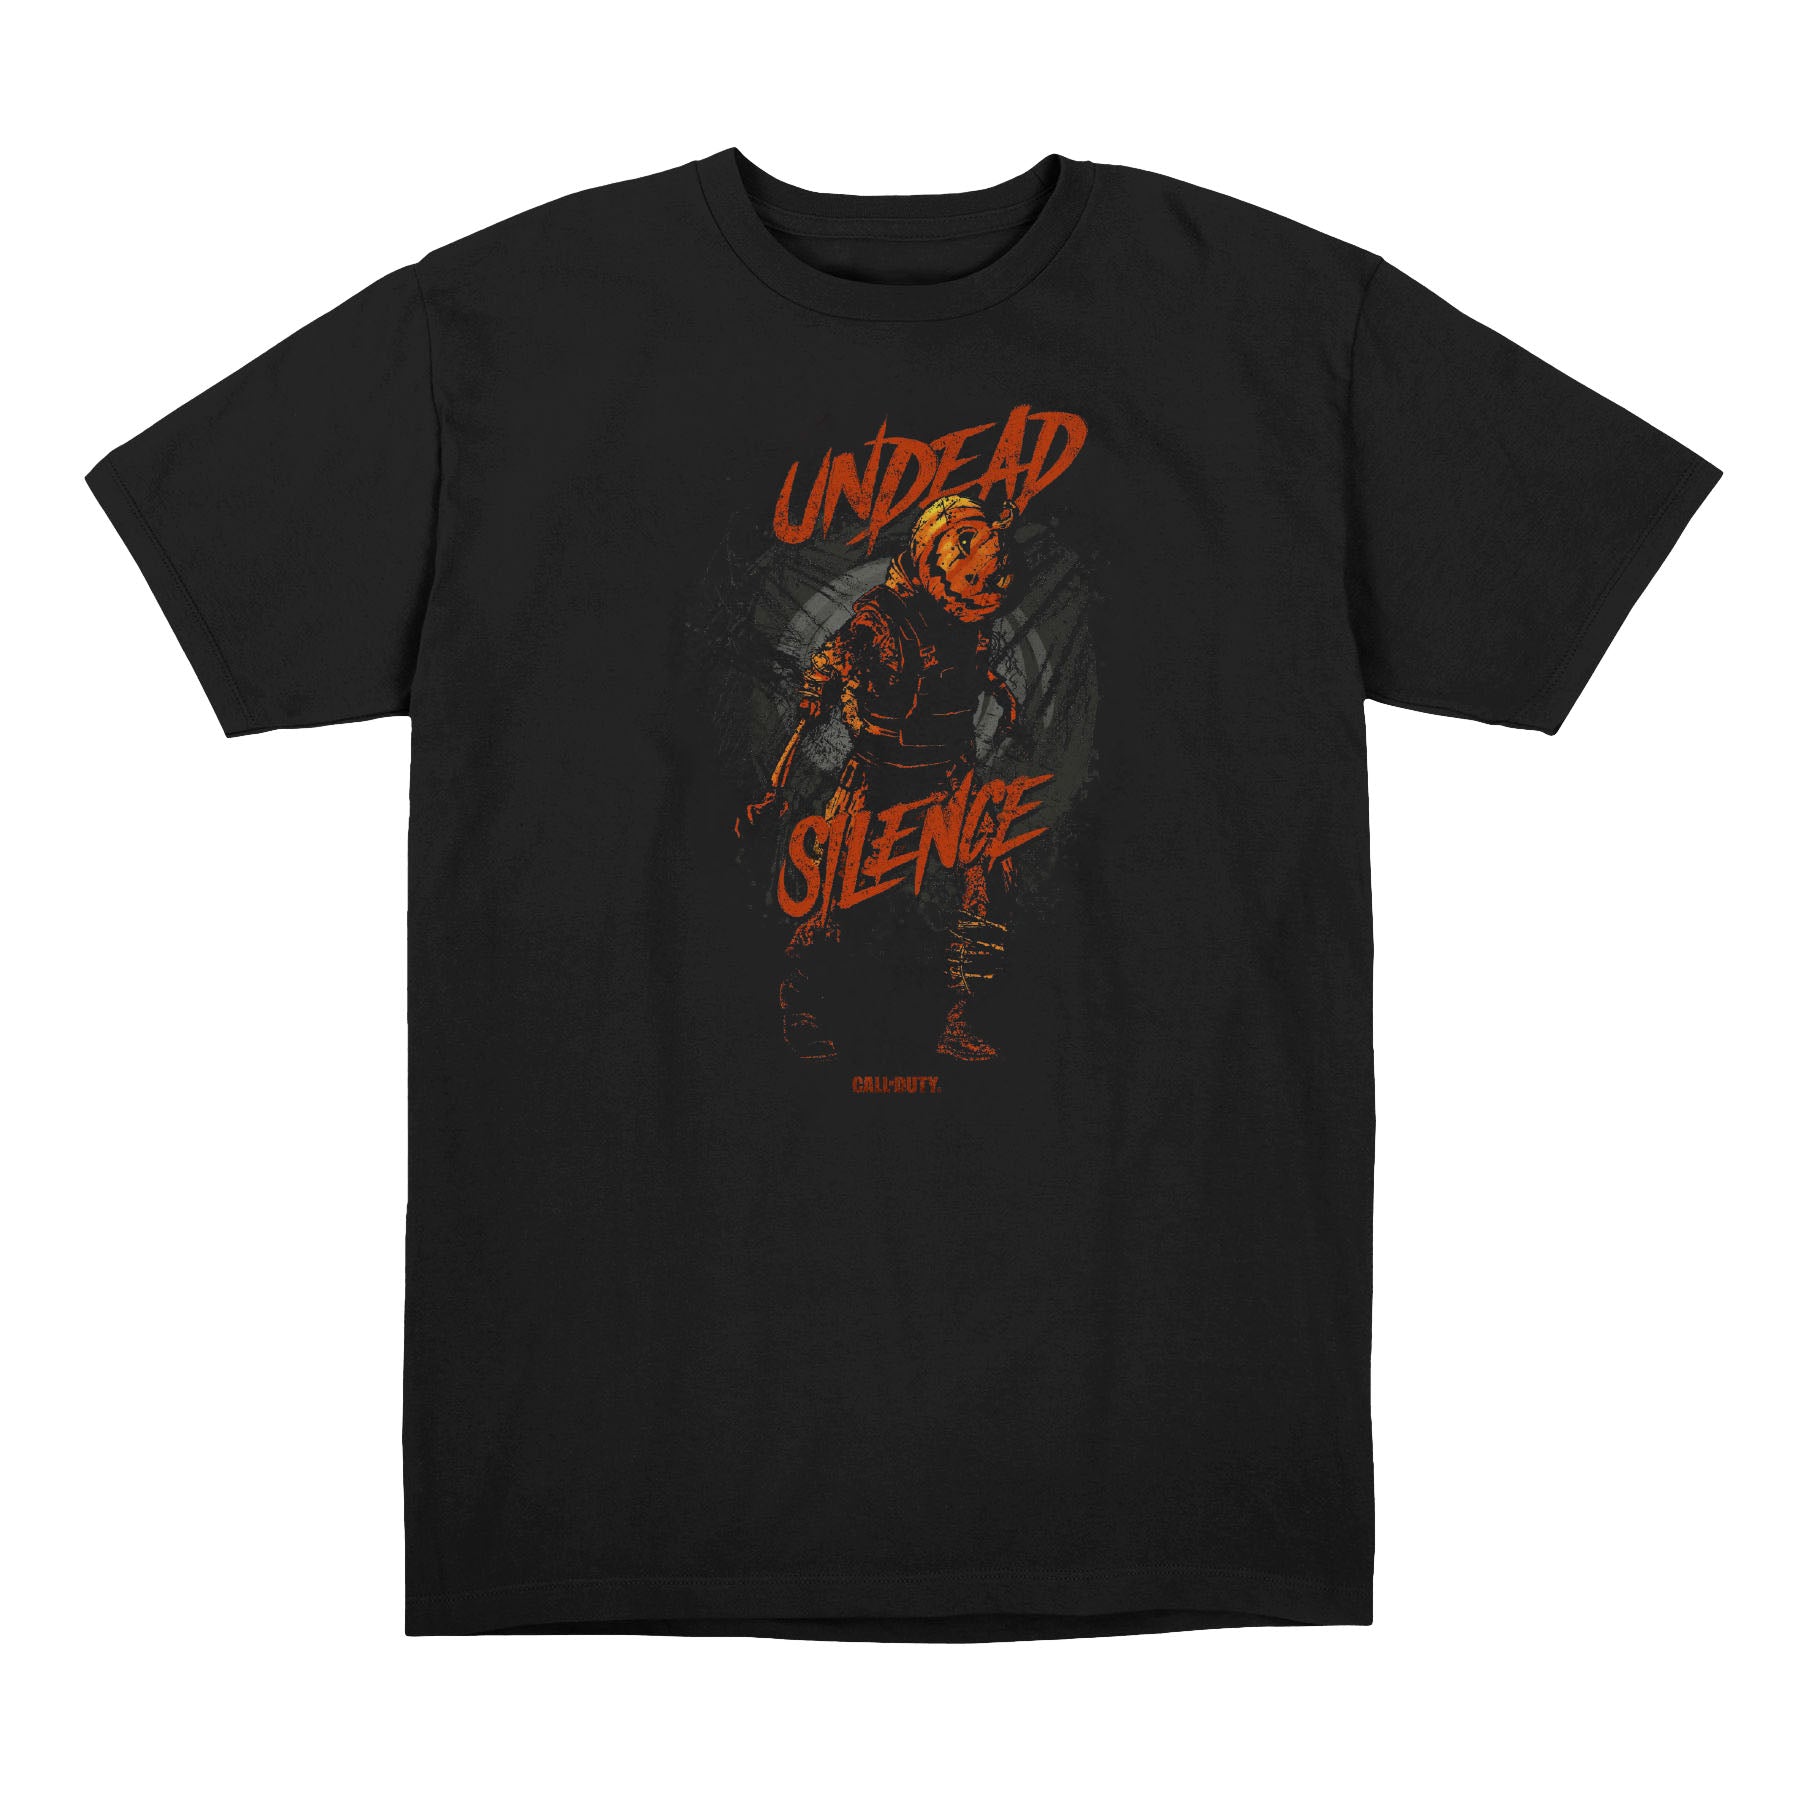 Call of Duty Undead Silence Black T-Shirt - Front View with Undead Silence Design